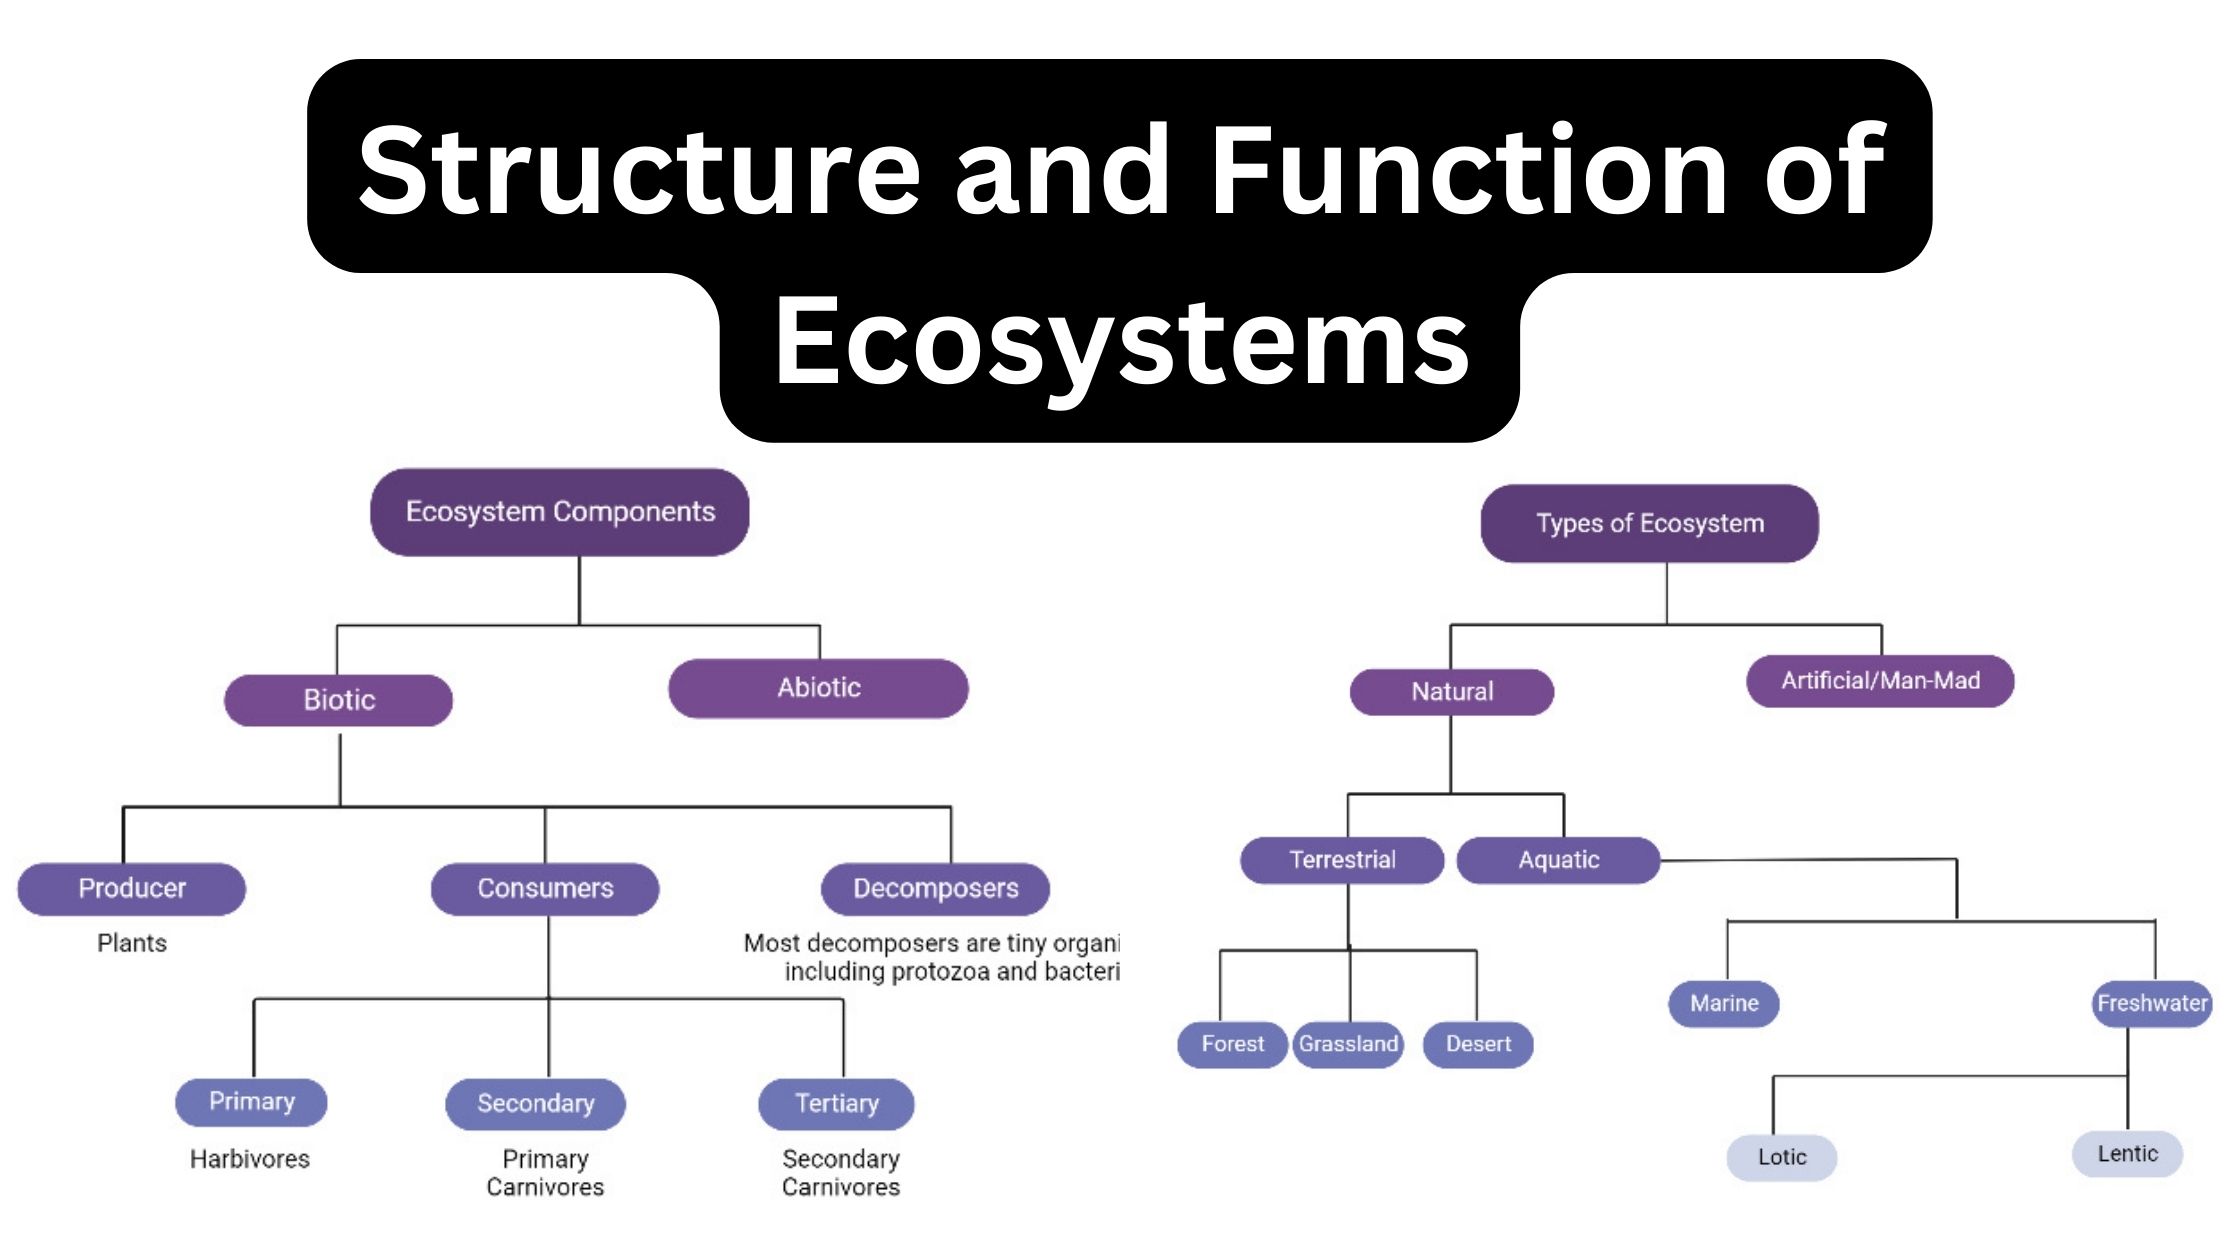 Structure and Function of Ecosystems